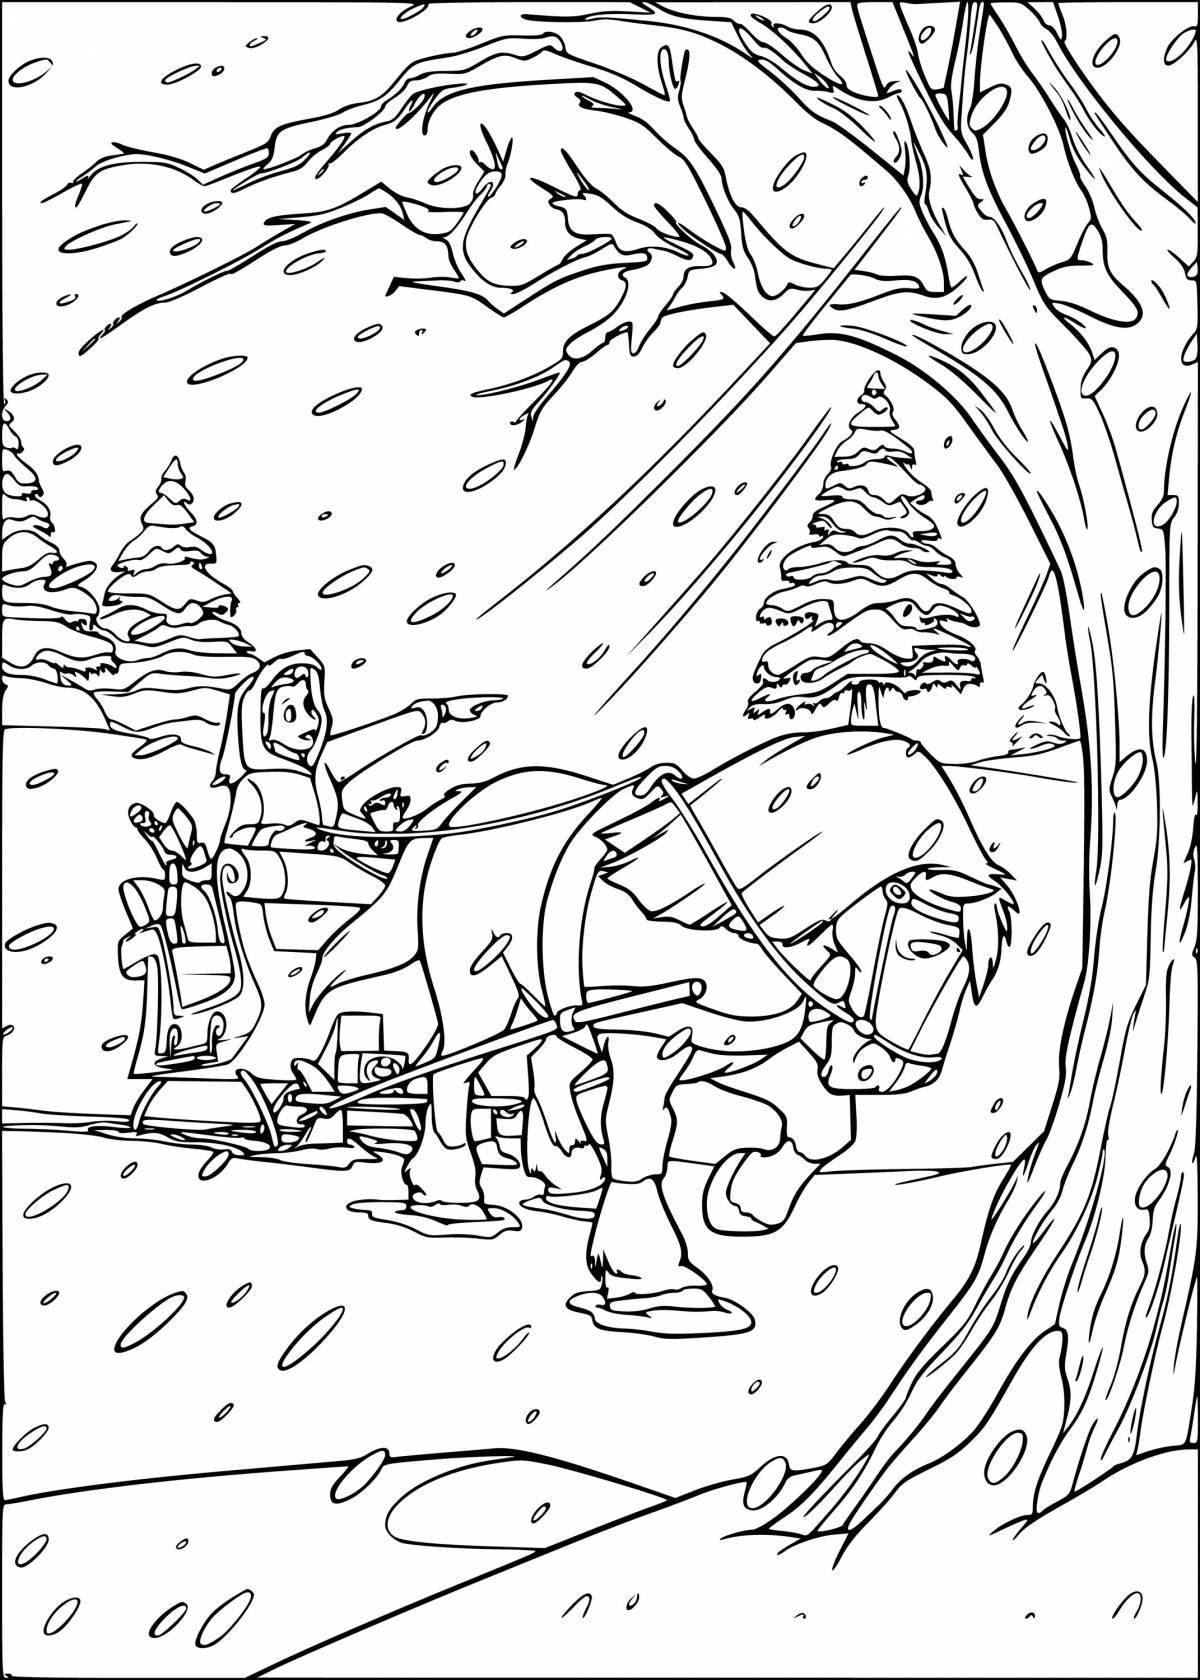 Blizzard coloring book for kids